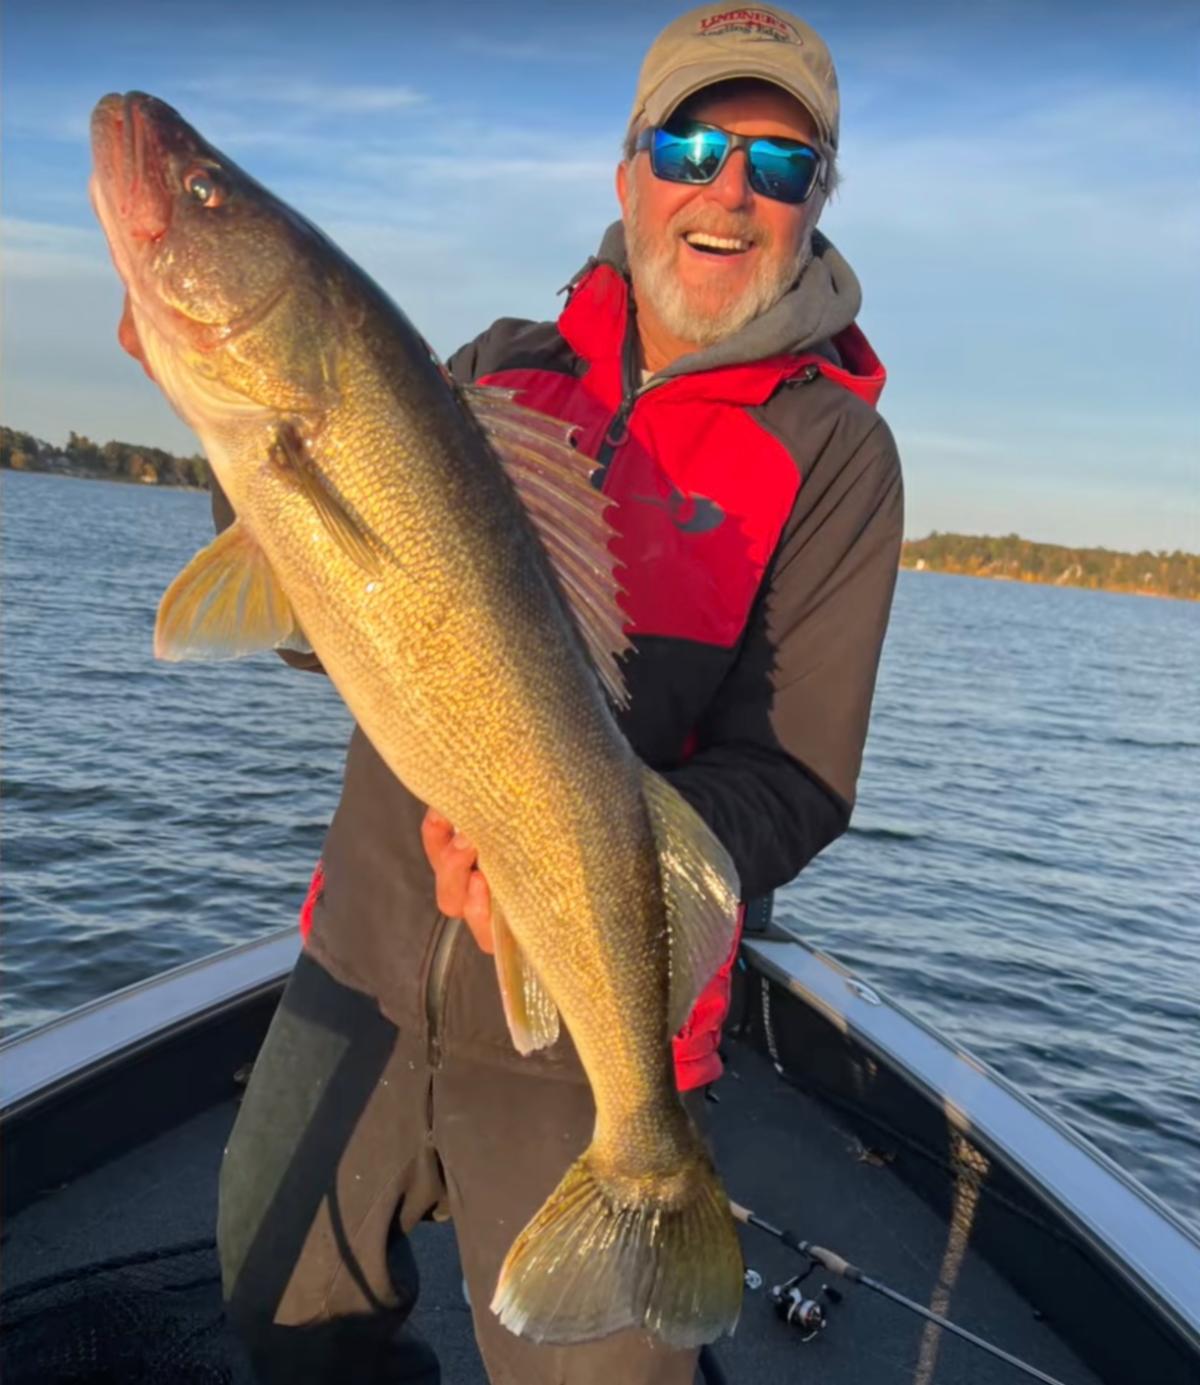 Mono out-fishes braid, 24k gold walleye dinner, Giant cisco eater – Target  Walleye